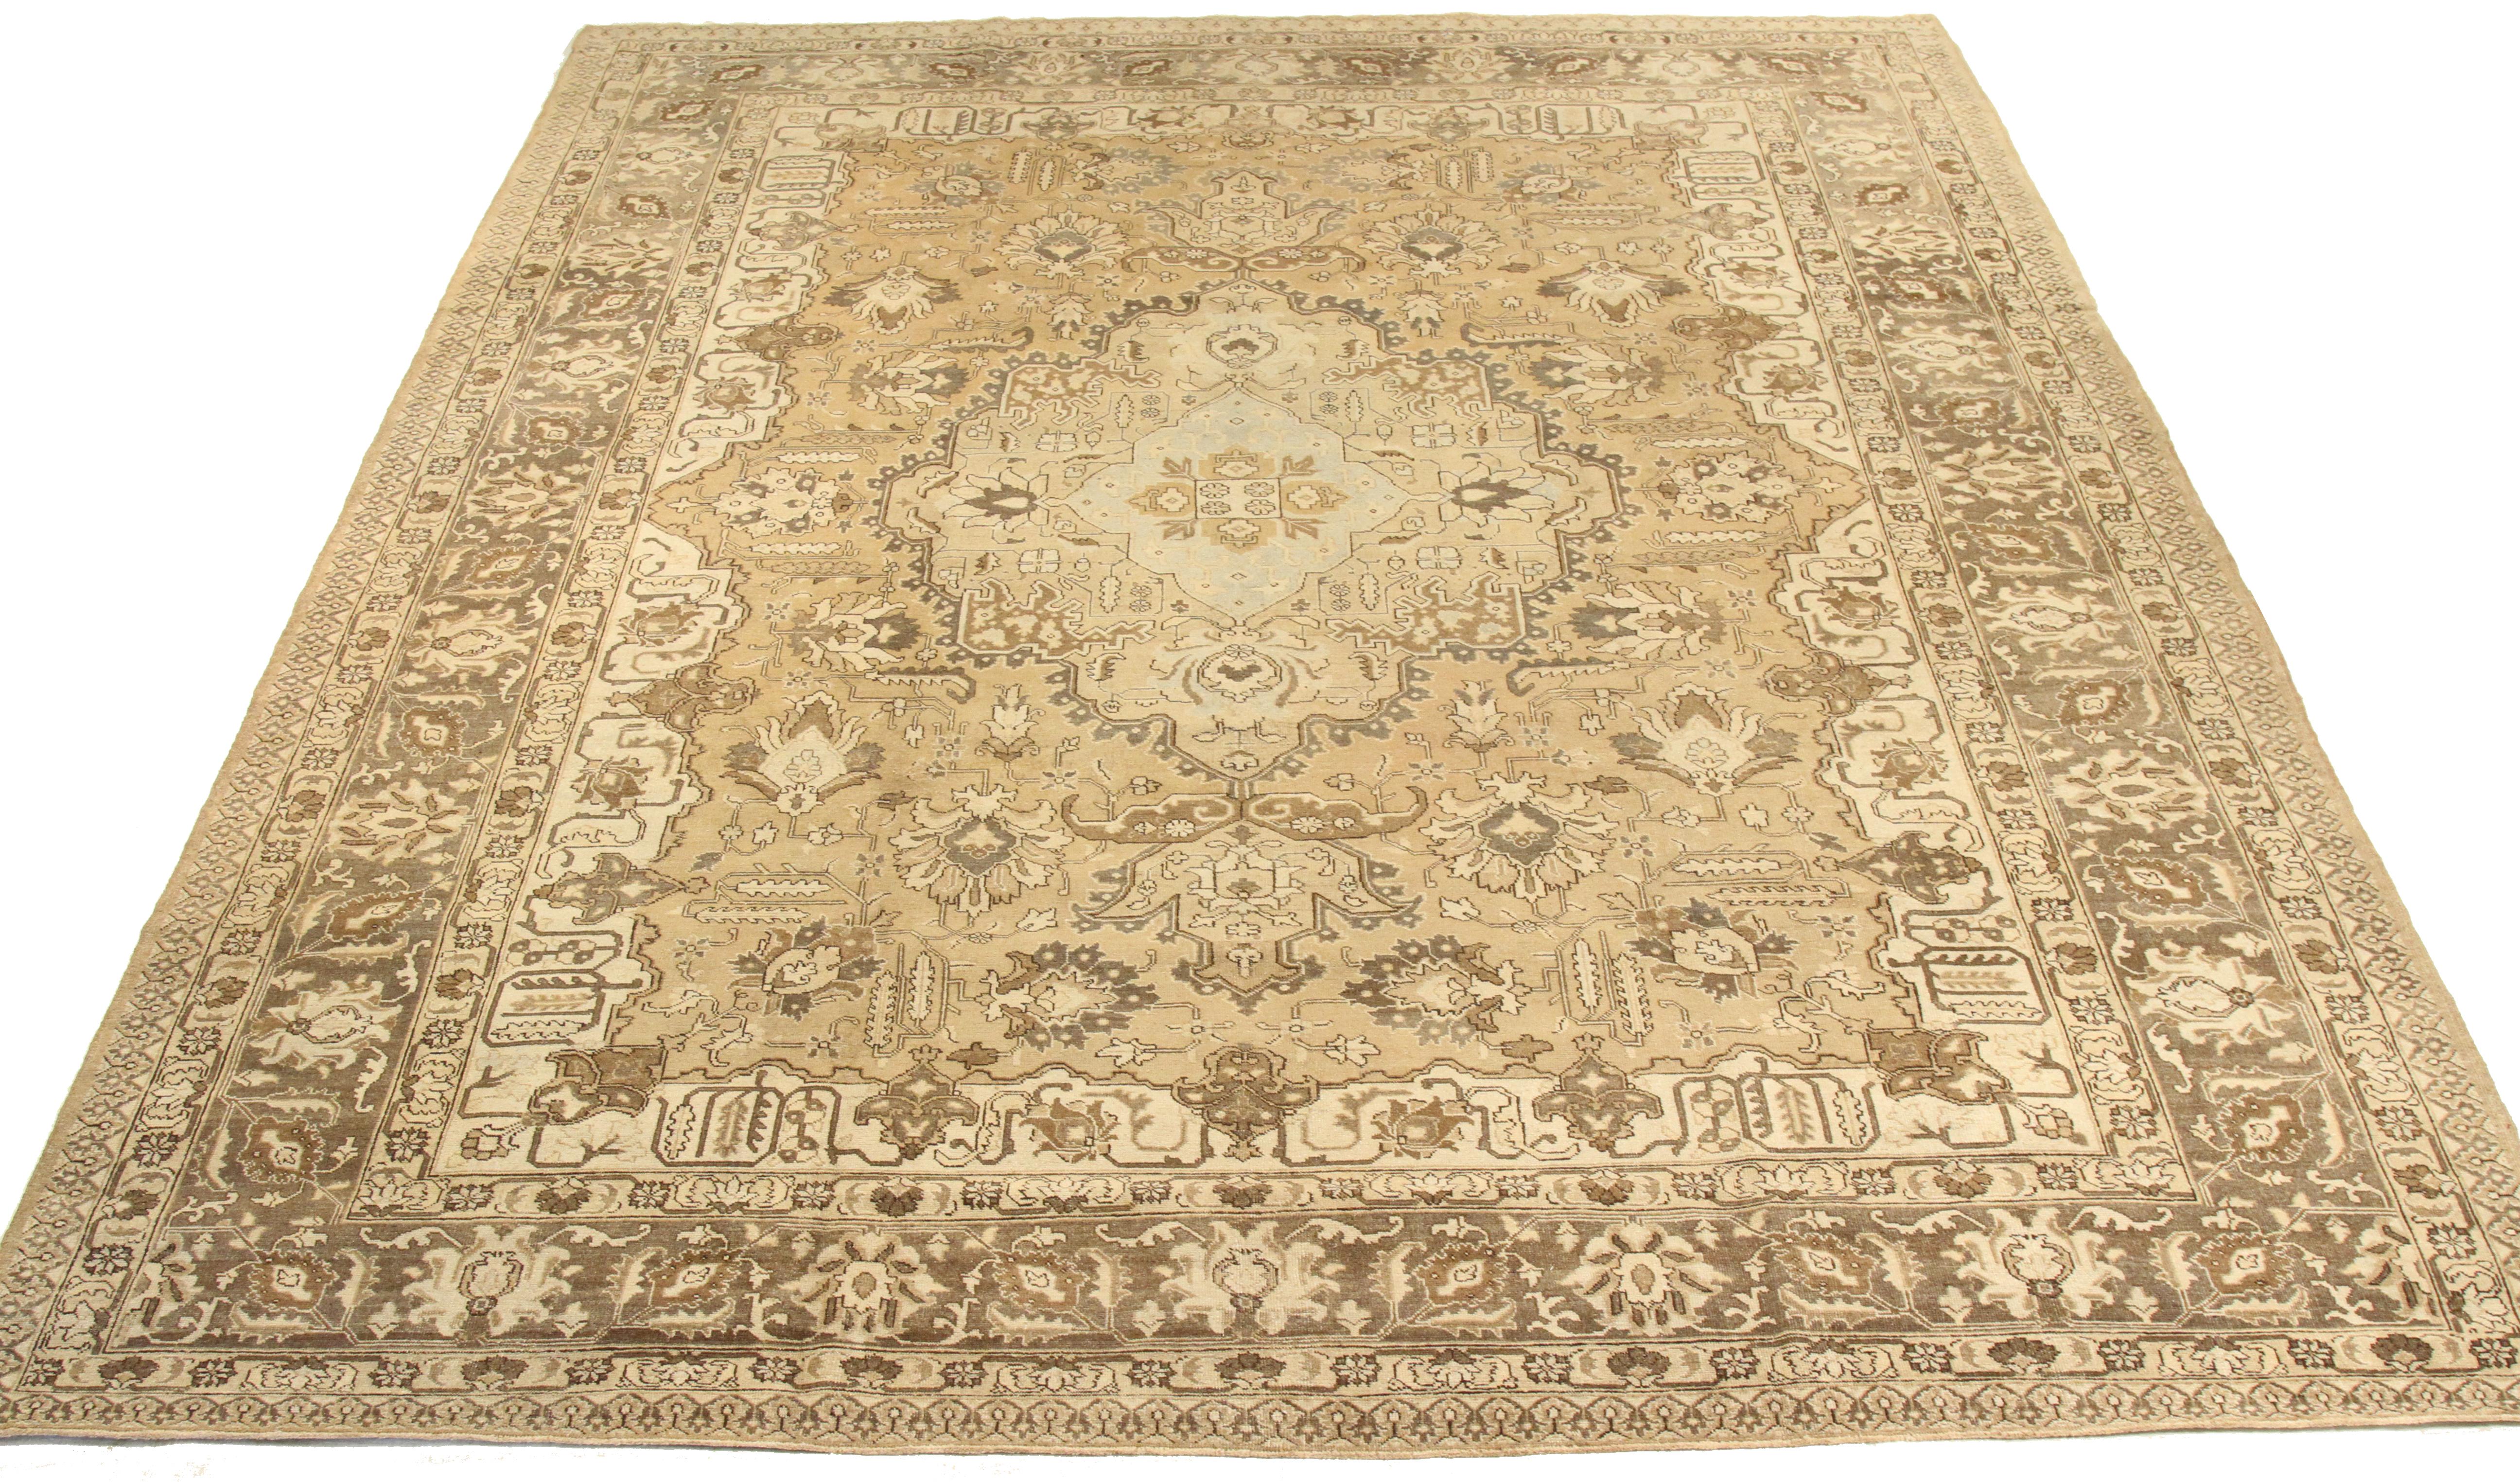 Antique mid-20th century hand-woven Persian area rug made from fine wool and all-natural vegetable dyes that are safe for people and pets. It features traditional Tabriz weaving depicting intricate botanical and animal patterns often in bold colors.